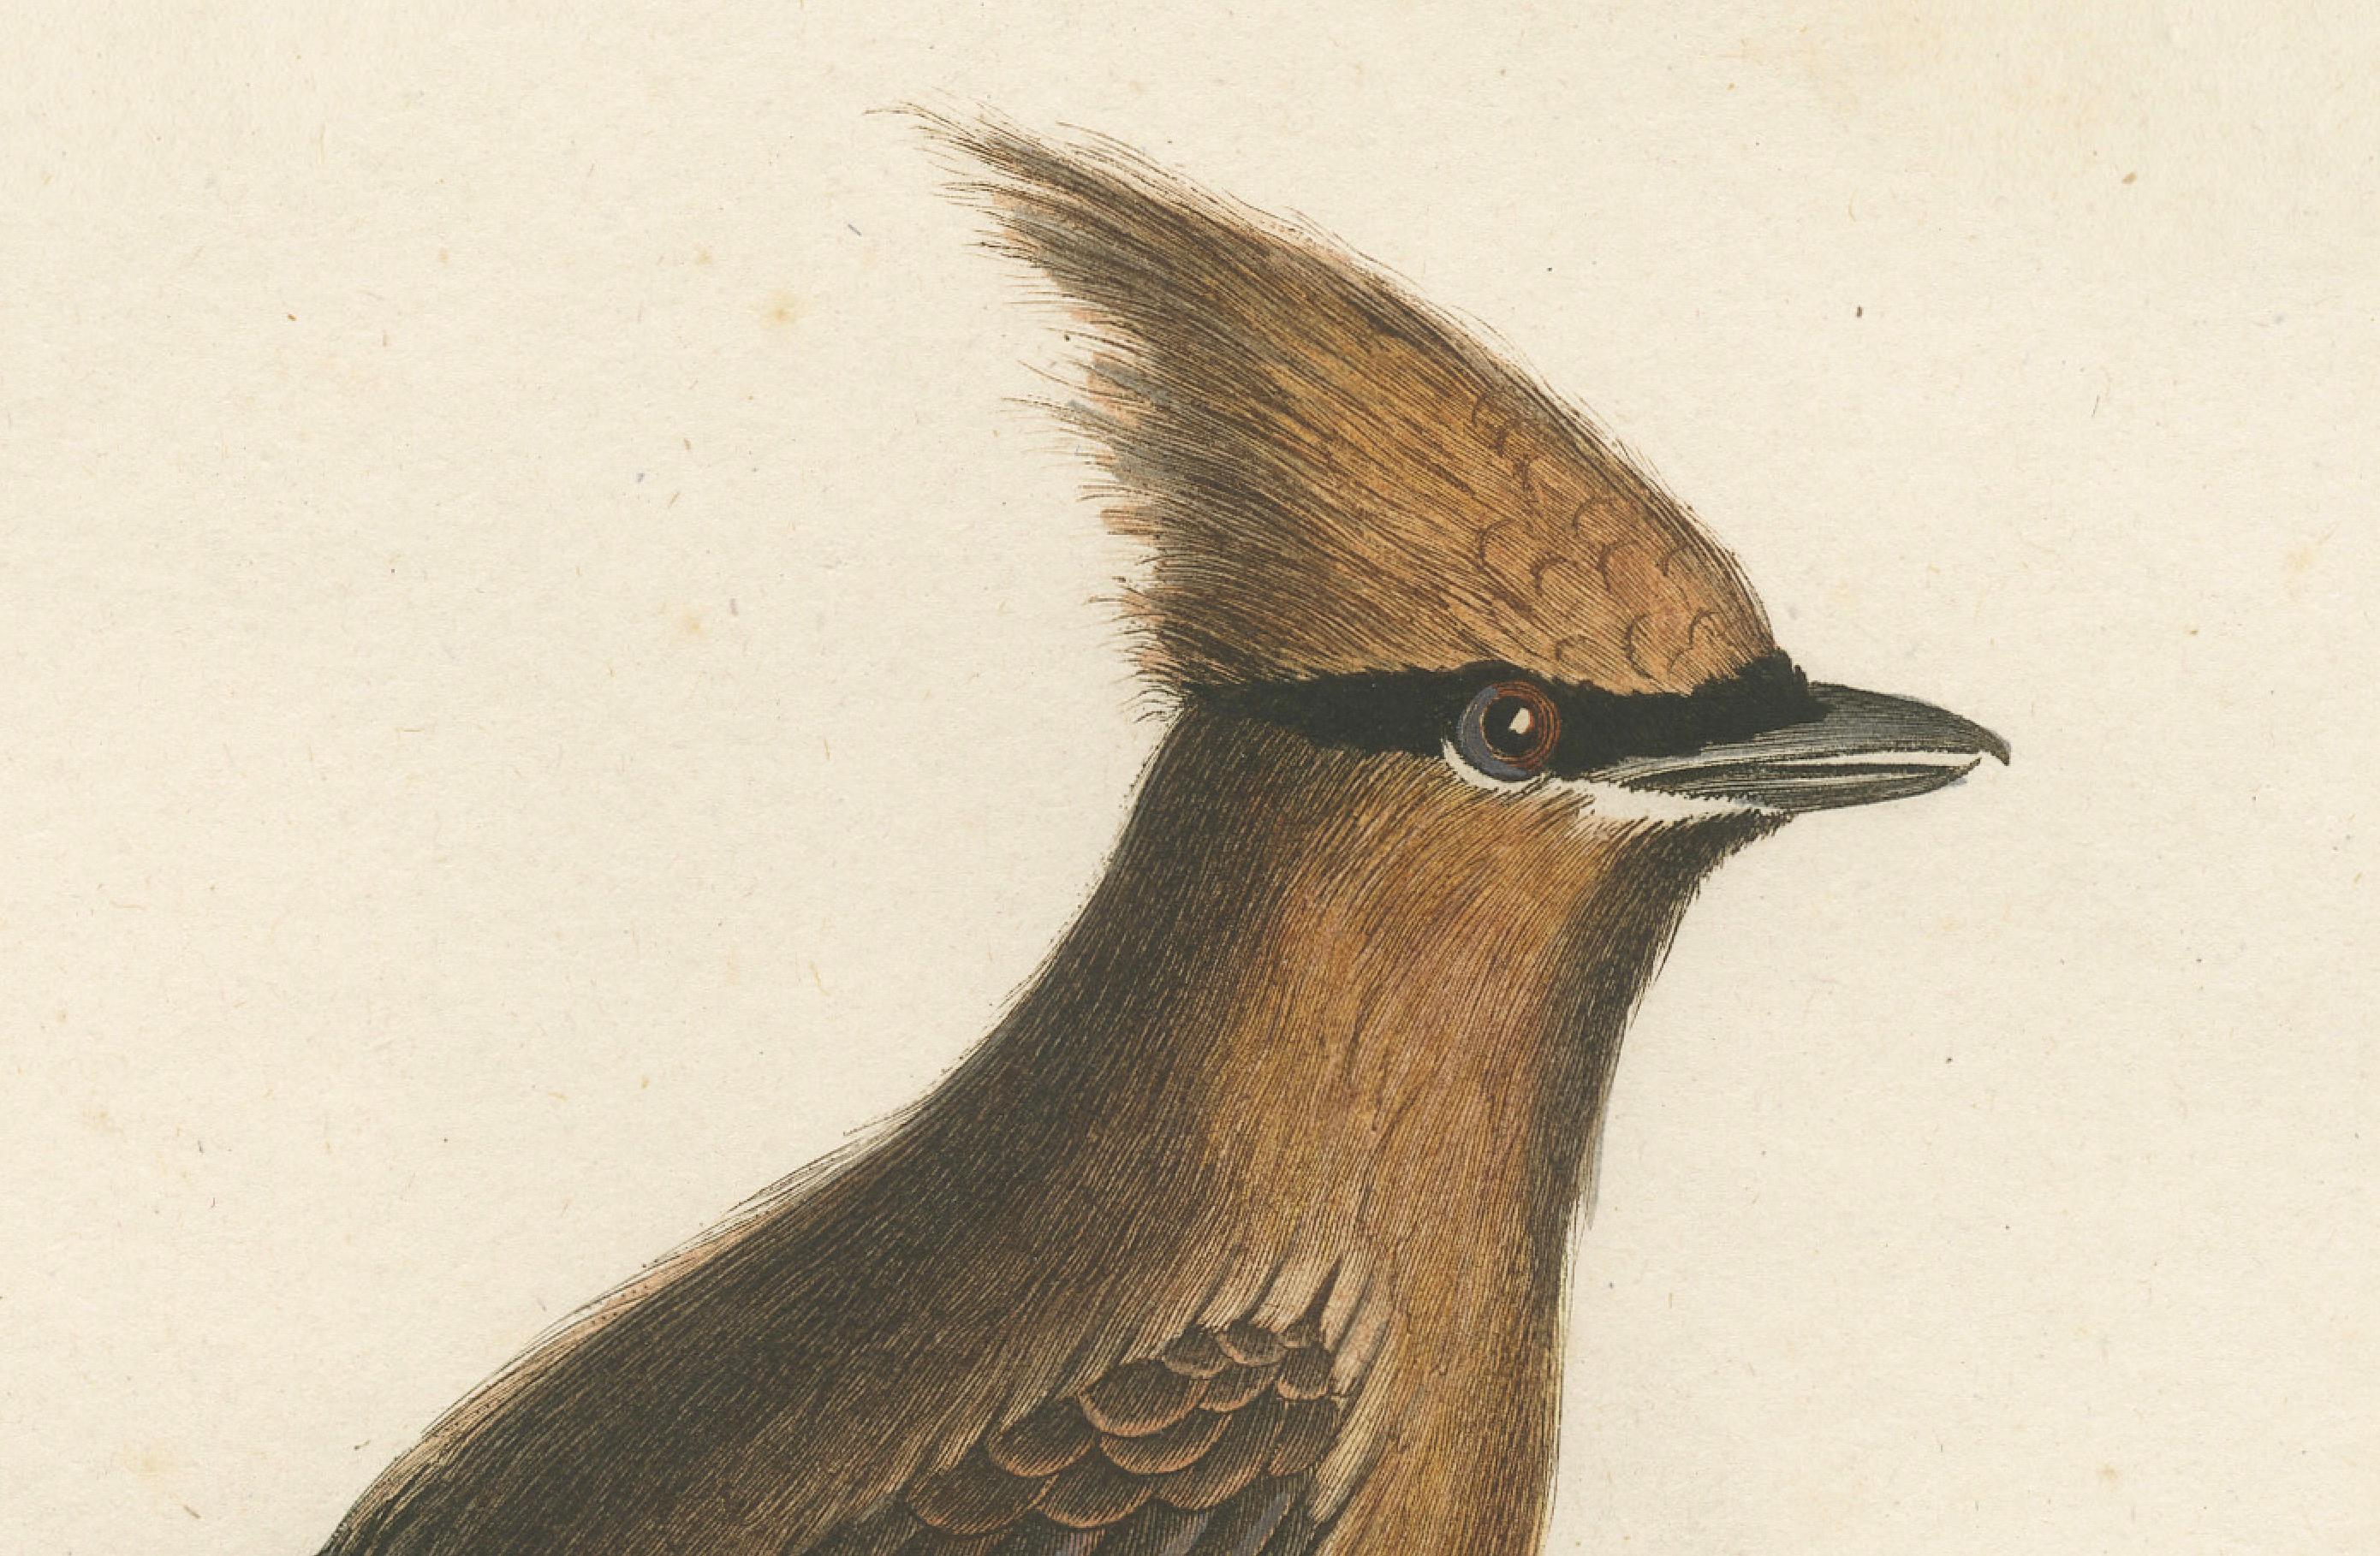 This is a handcolored antique print titled 'Le Jaseur du Cédre', featuring the cedar waxwing (Bombycilla cedrorum), known for its sleek appearance and sociable nature. The bird is rendered in exquisite detail, perched on a branch in profile, with